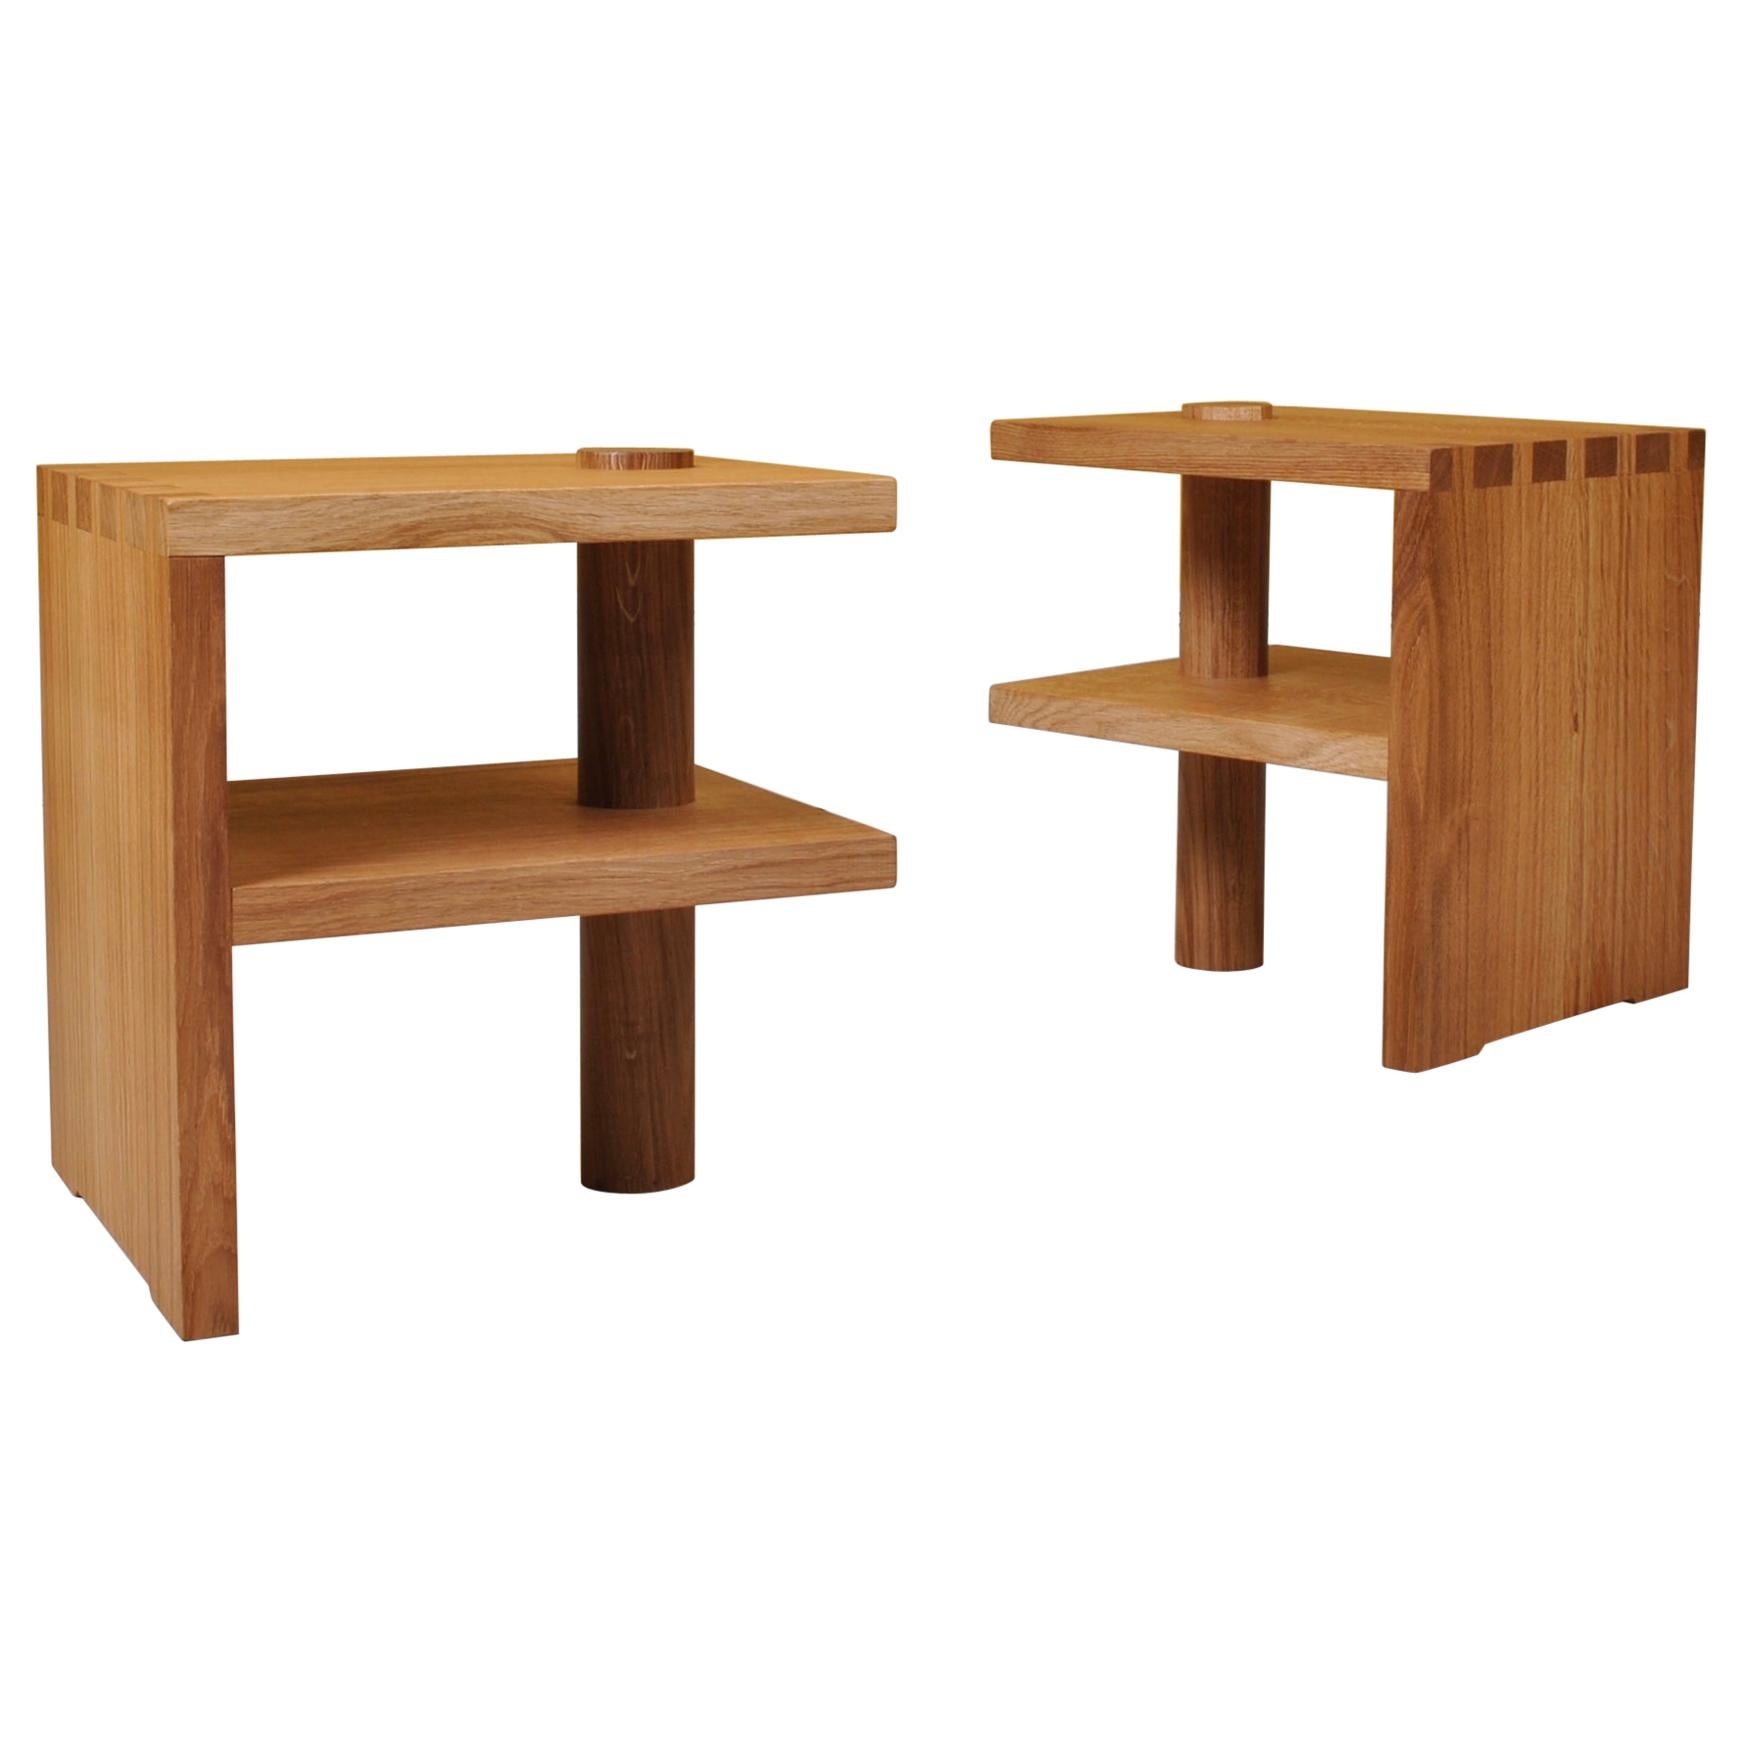 Pair of Handcrafted Architectural Oak Stools